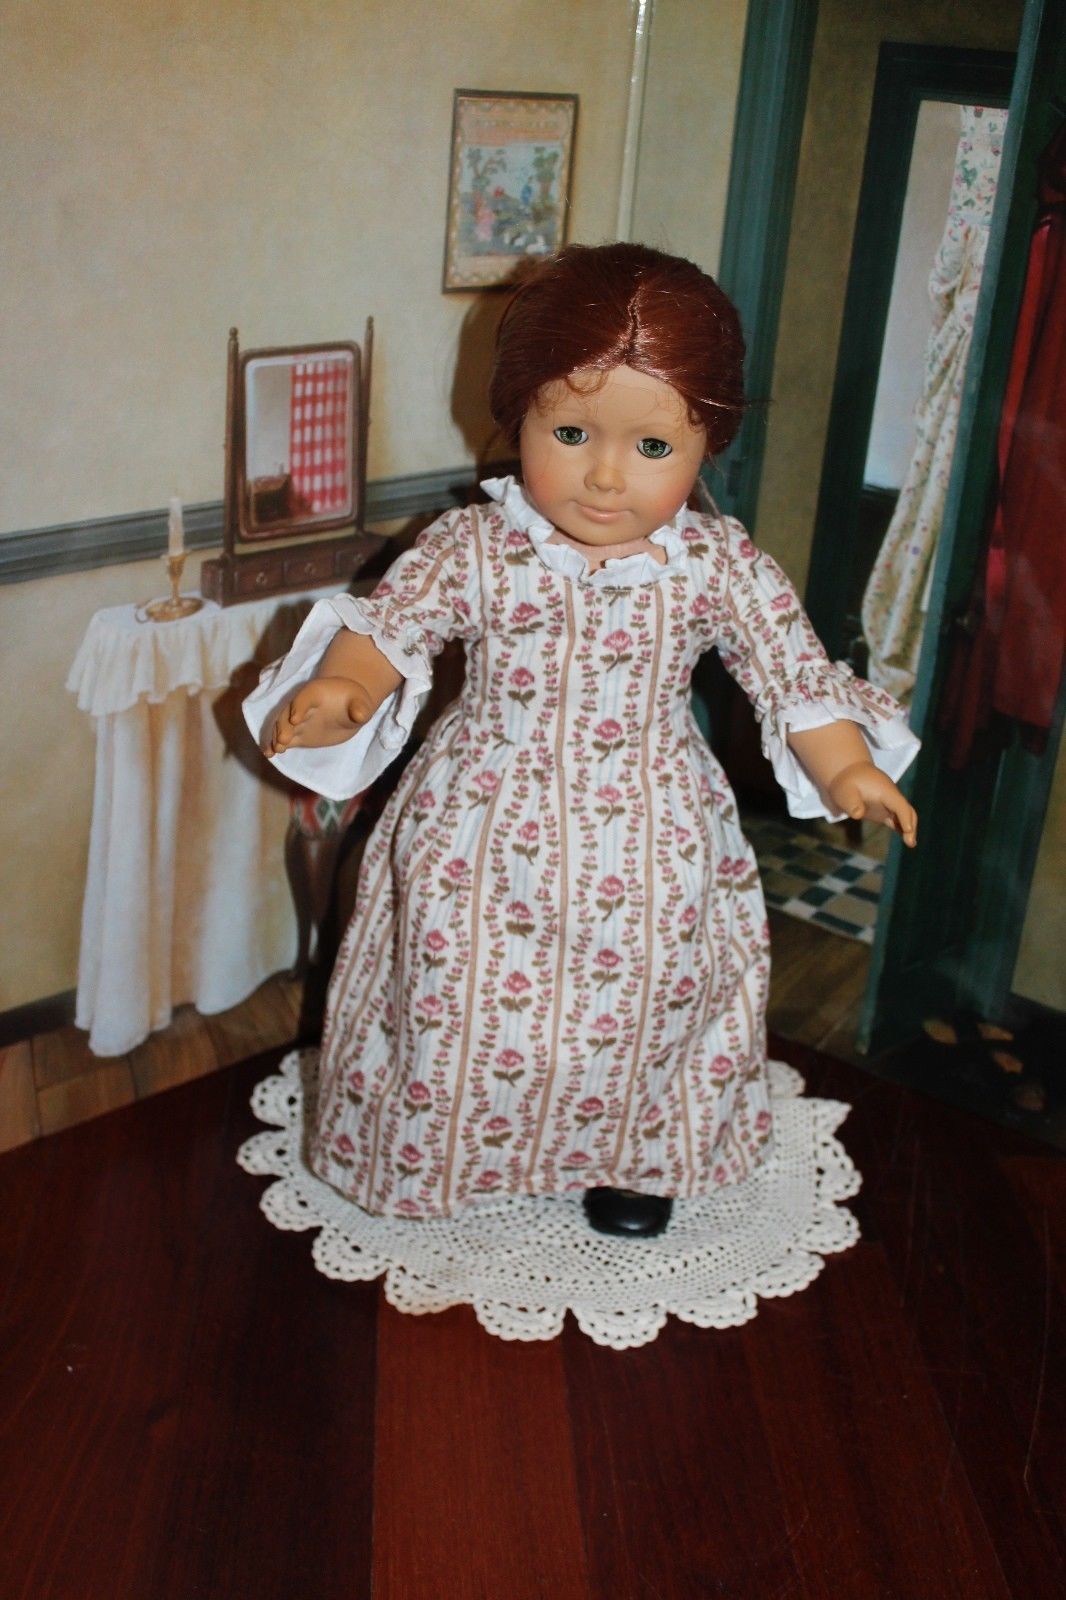 How Much Are The Original American Girl Dolls Actually Worth?